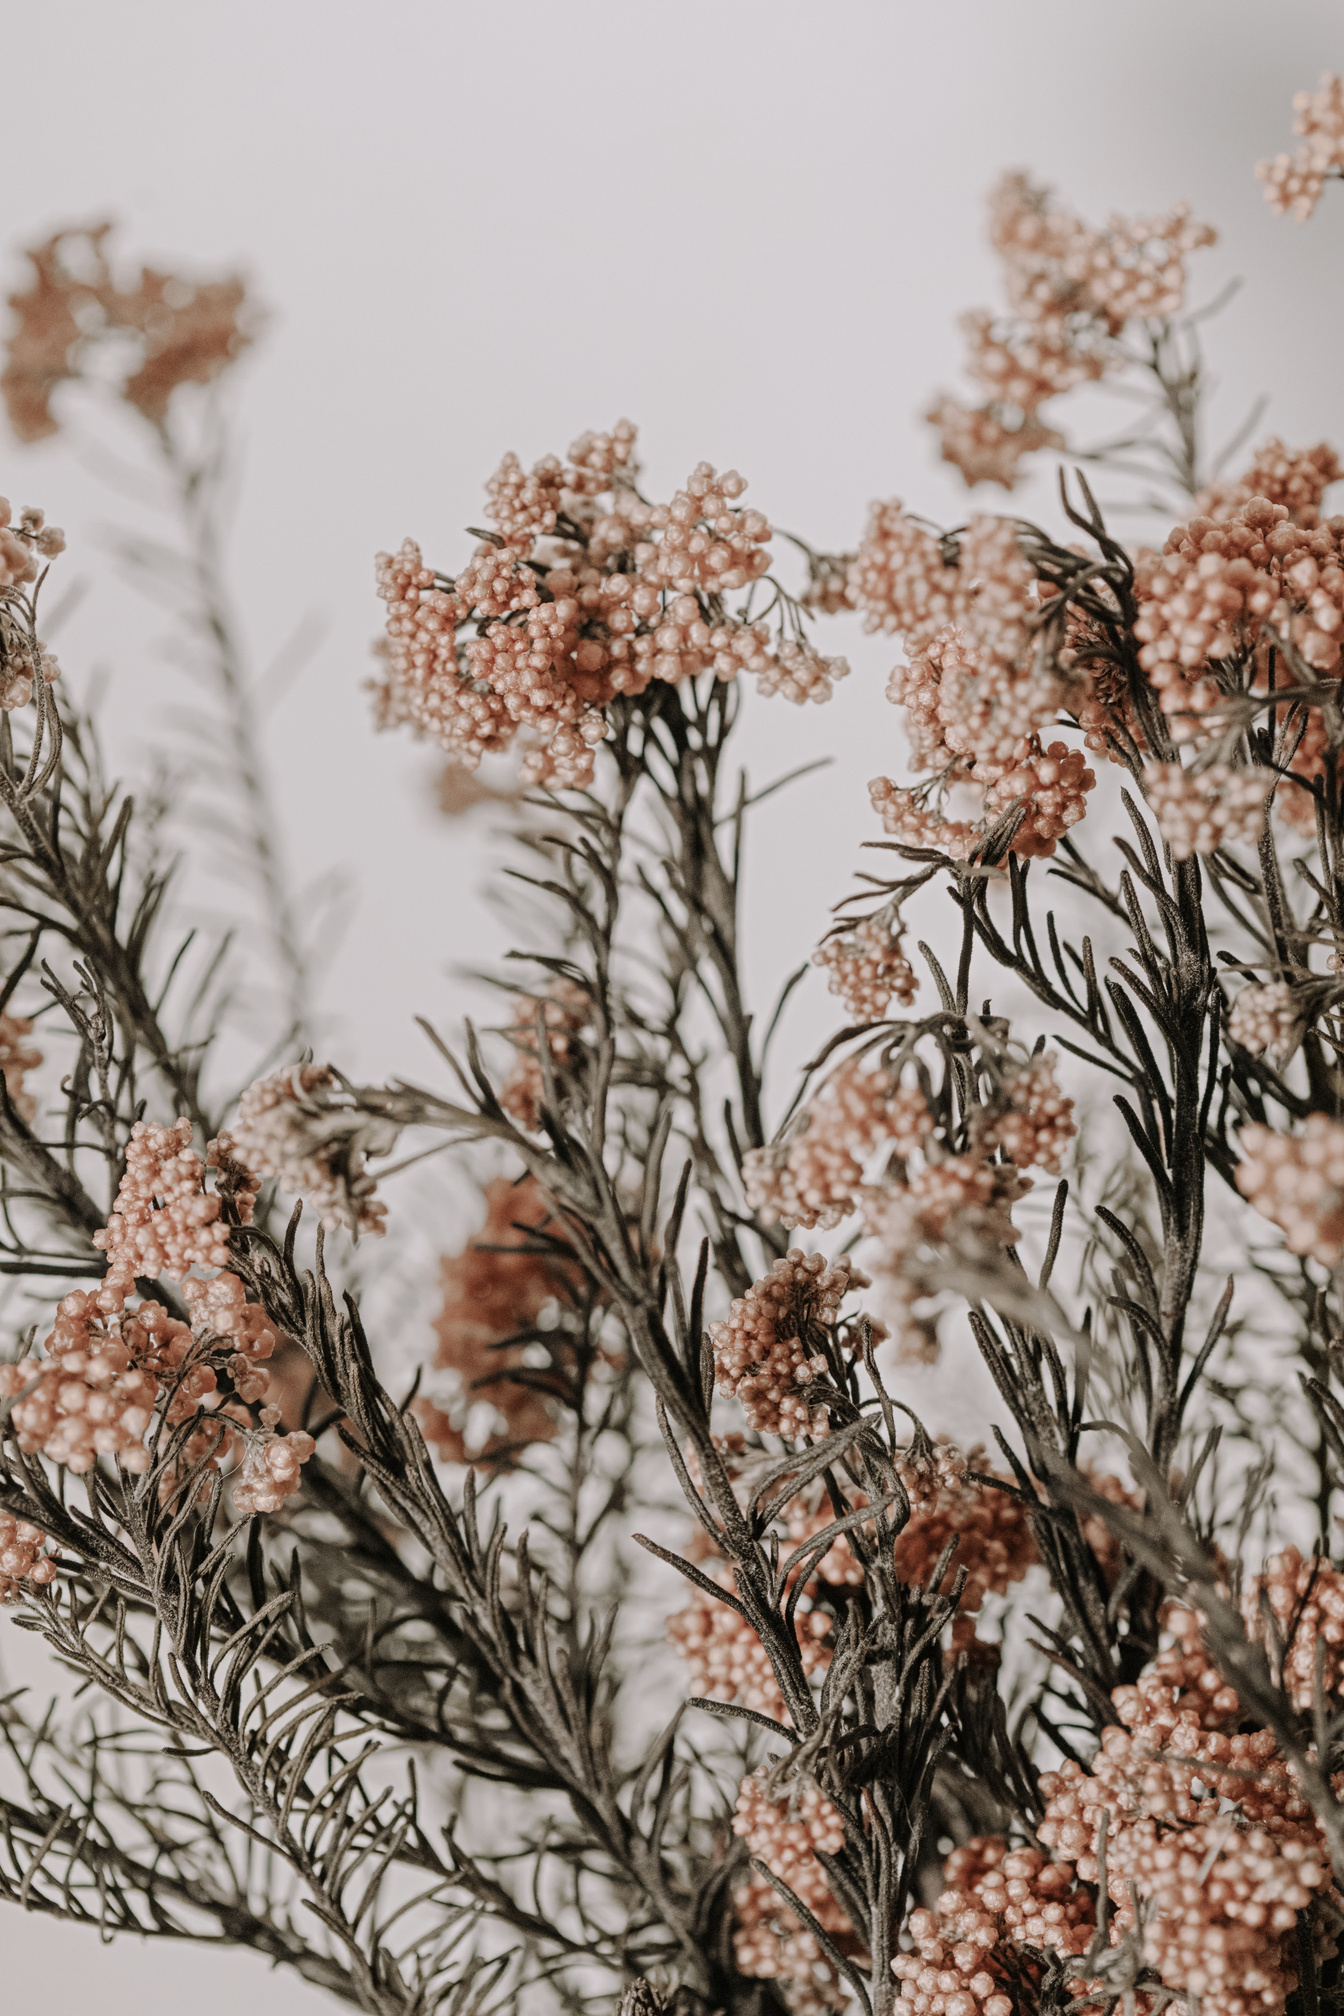 Dried Flowers on Light Background